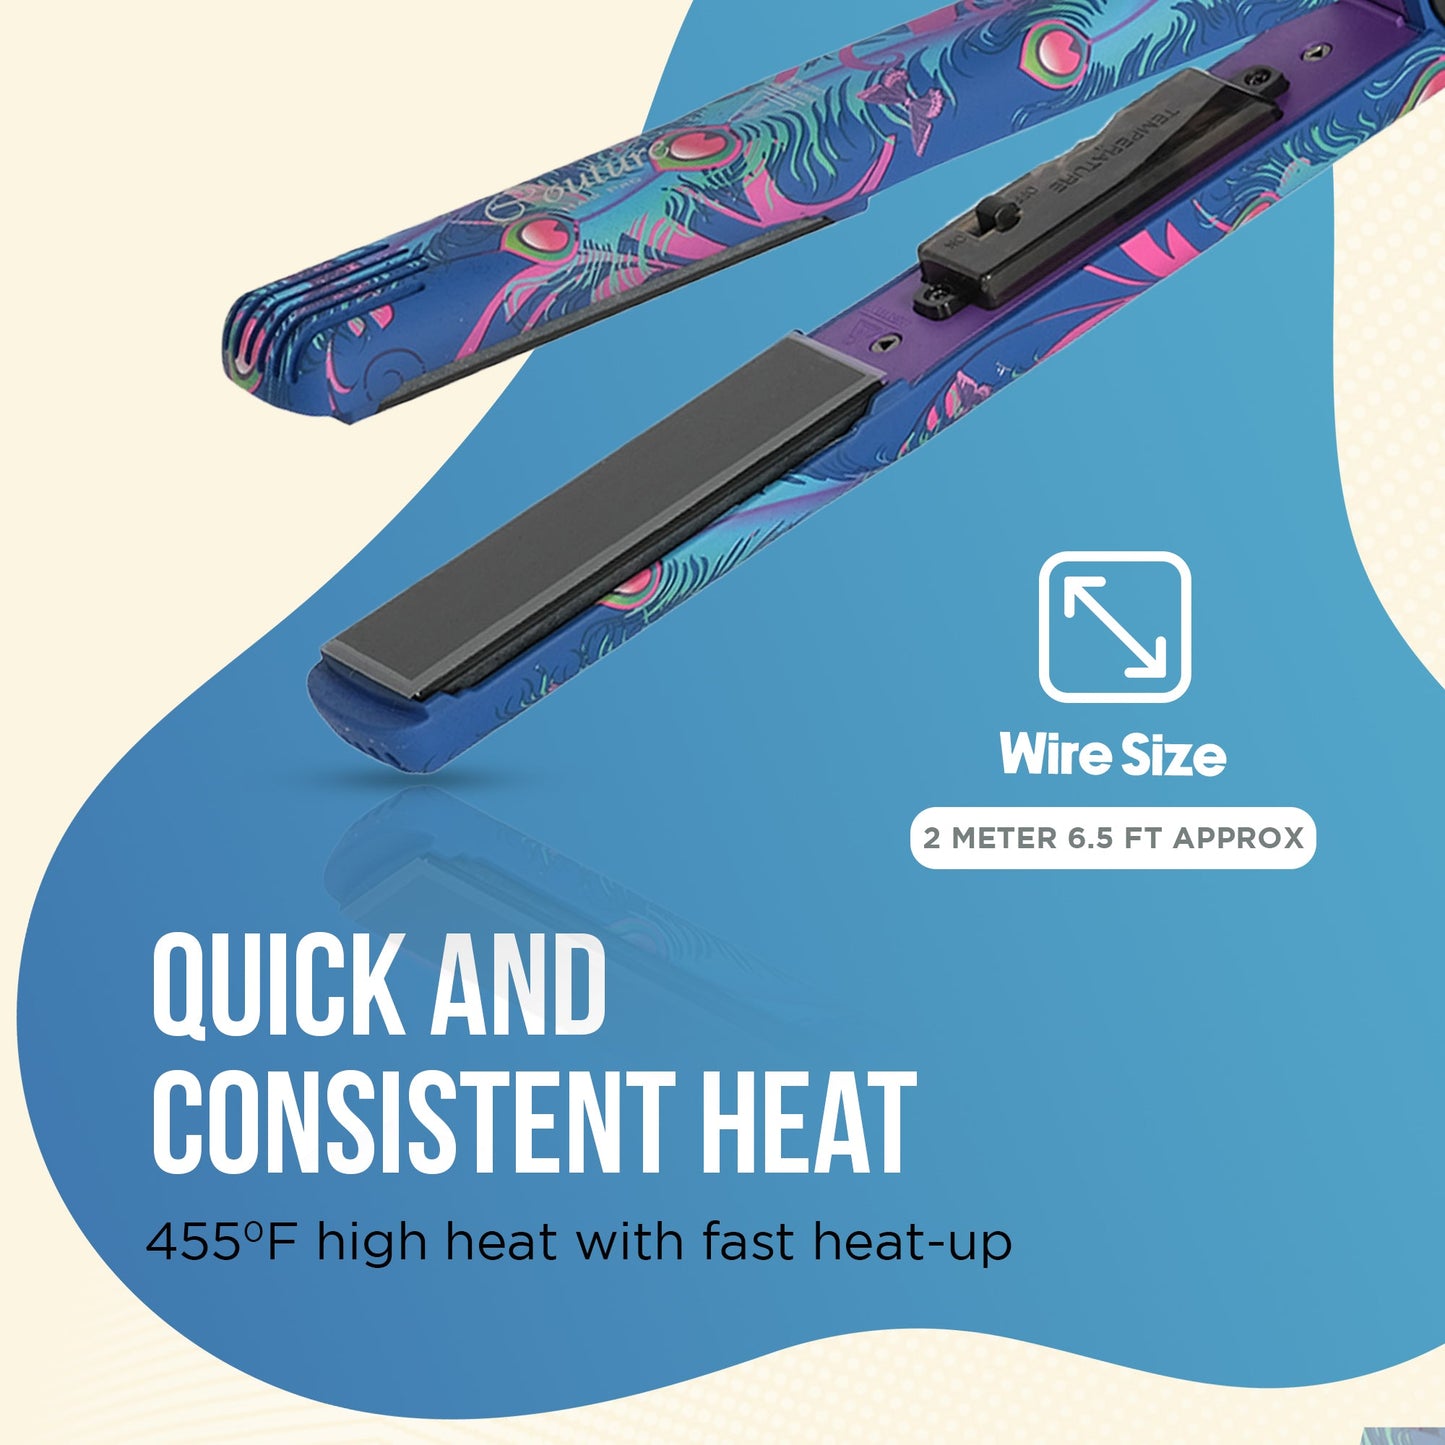 Couture Hair Pro Classic Hair Straightener 1'' - Peacock - Couture Hair Pro